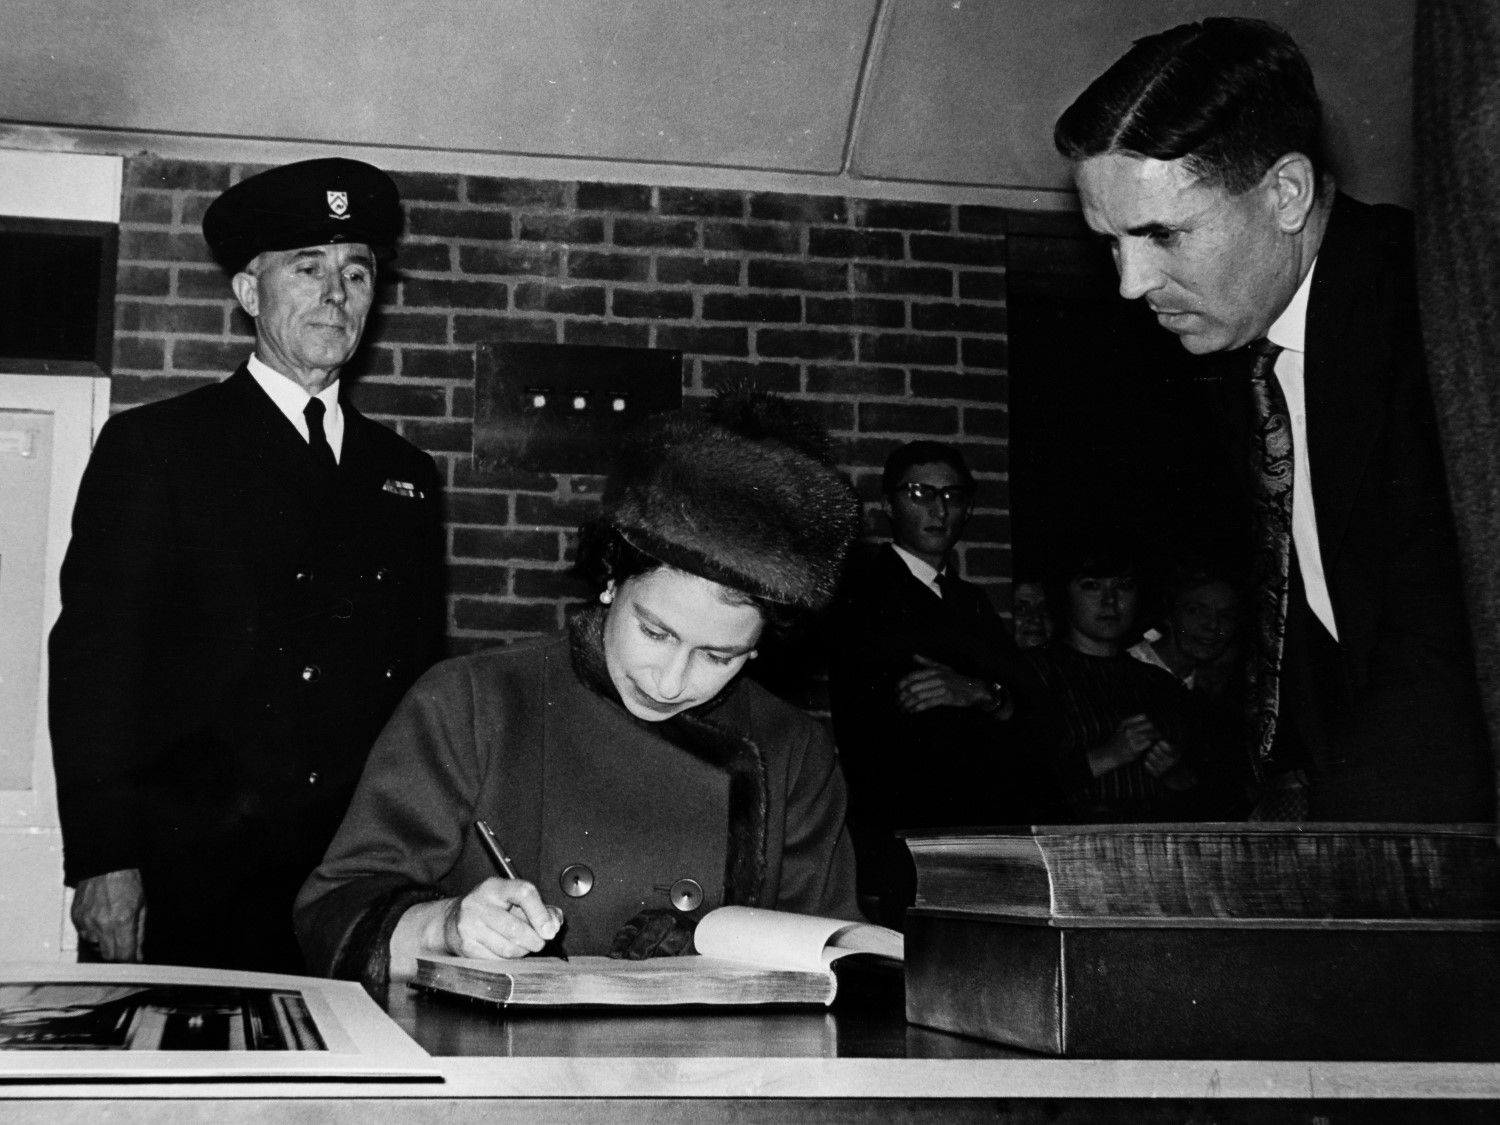 Her Majesty signs the visitors' book